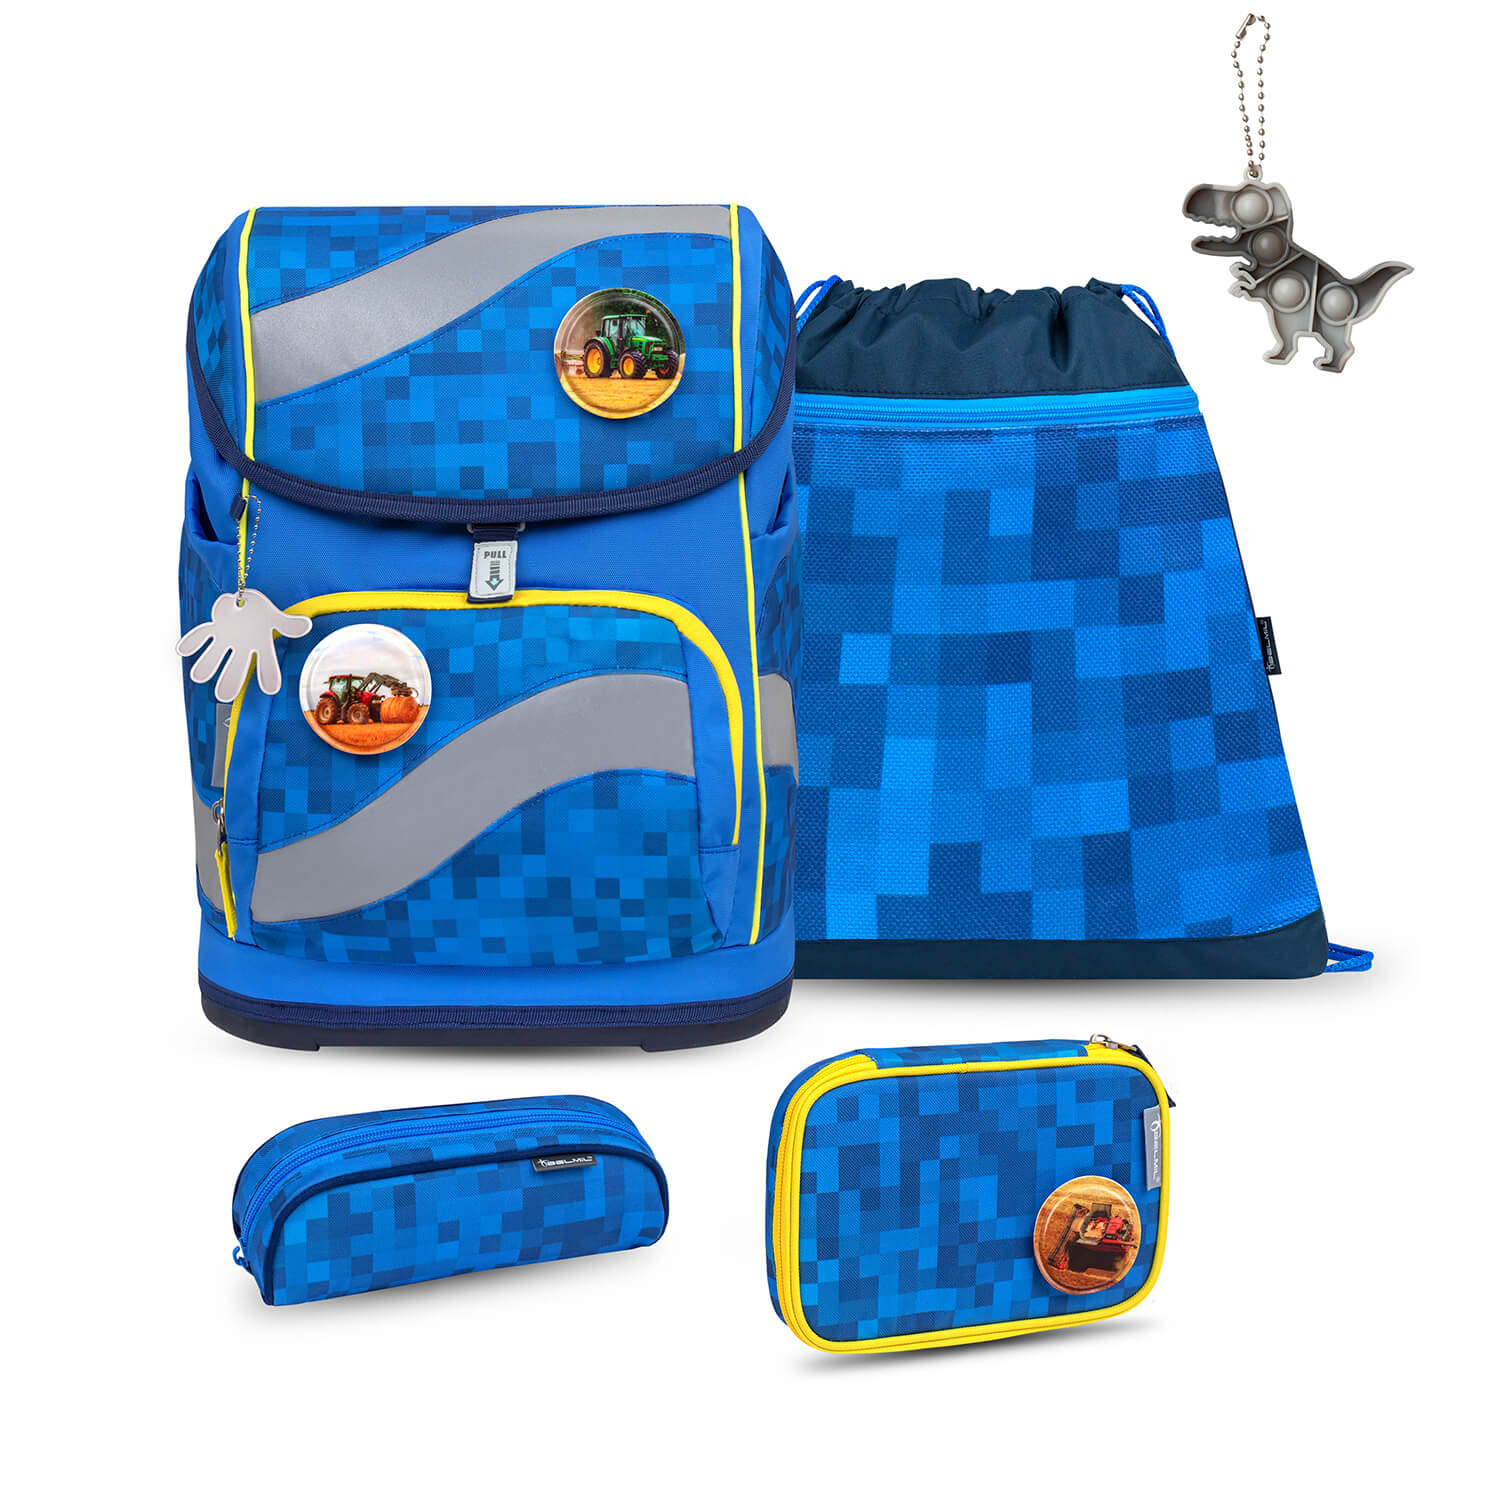 Smarty Funky Blue schoolbag set 6 pcs with GRATIS keychain